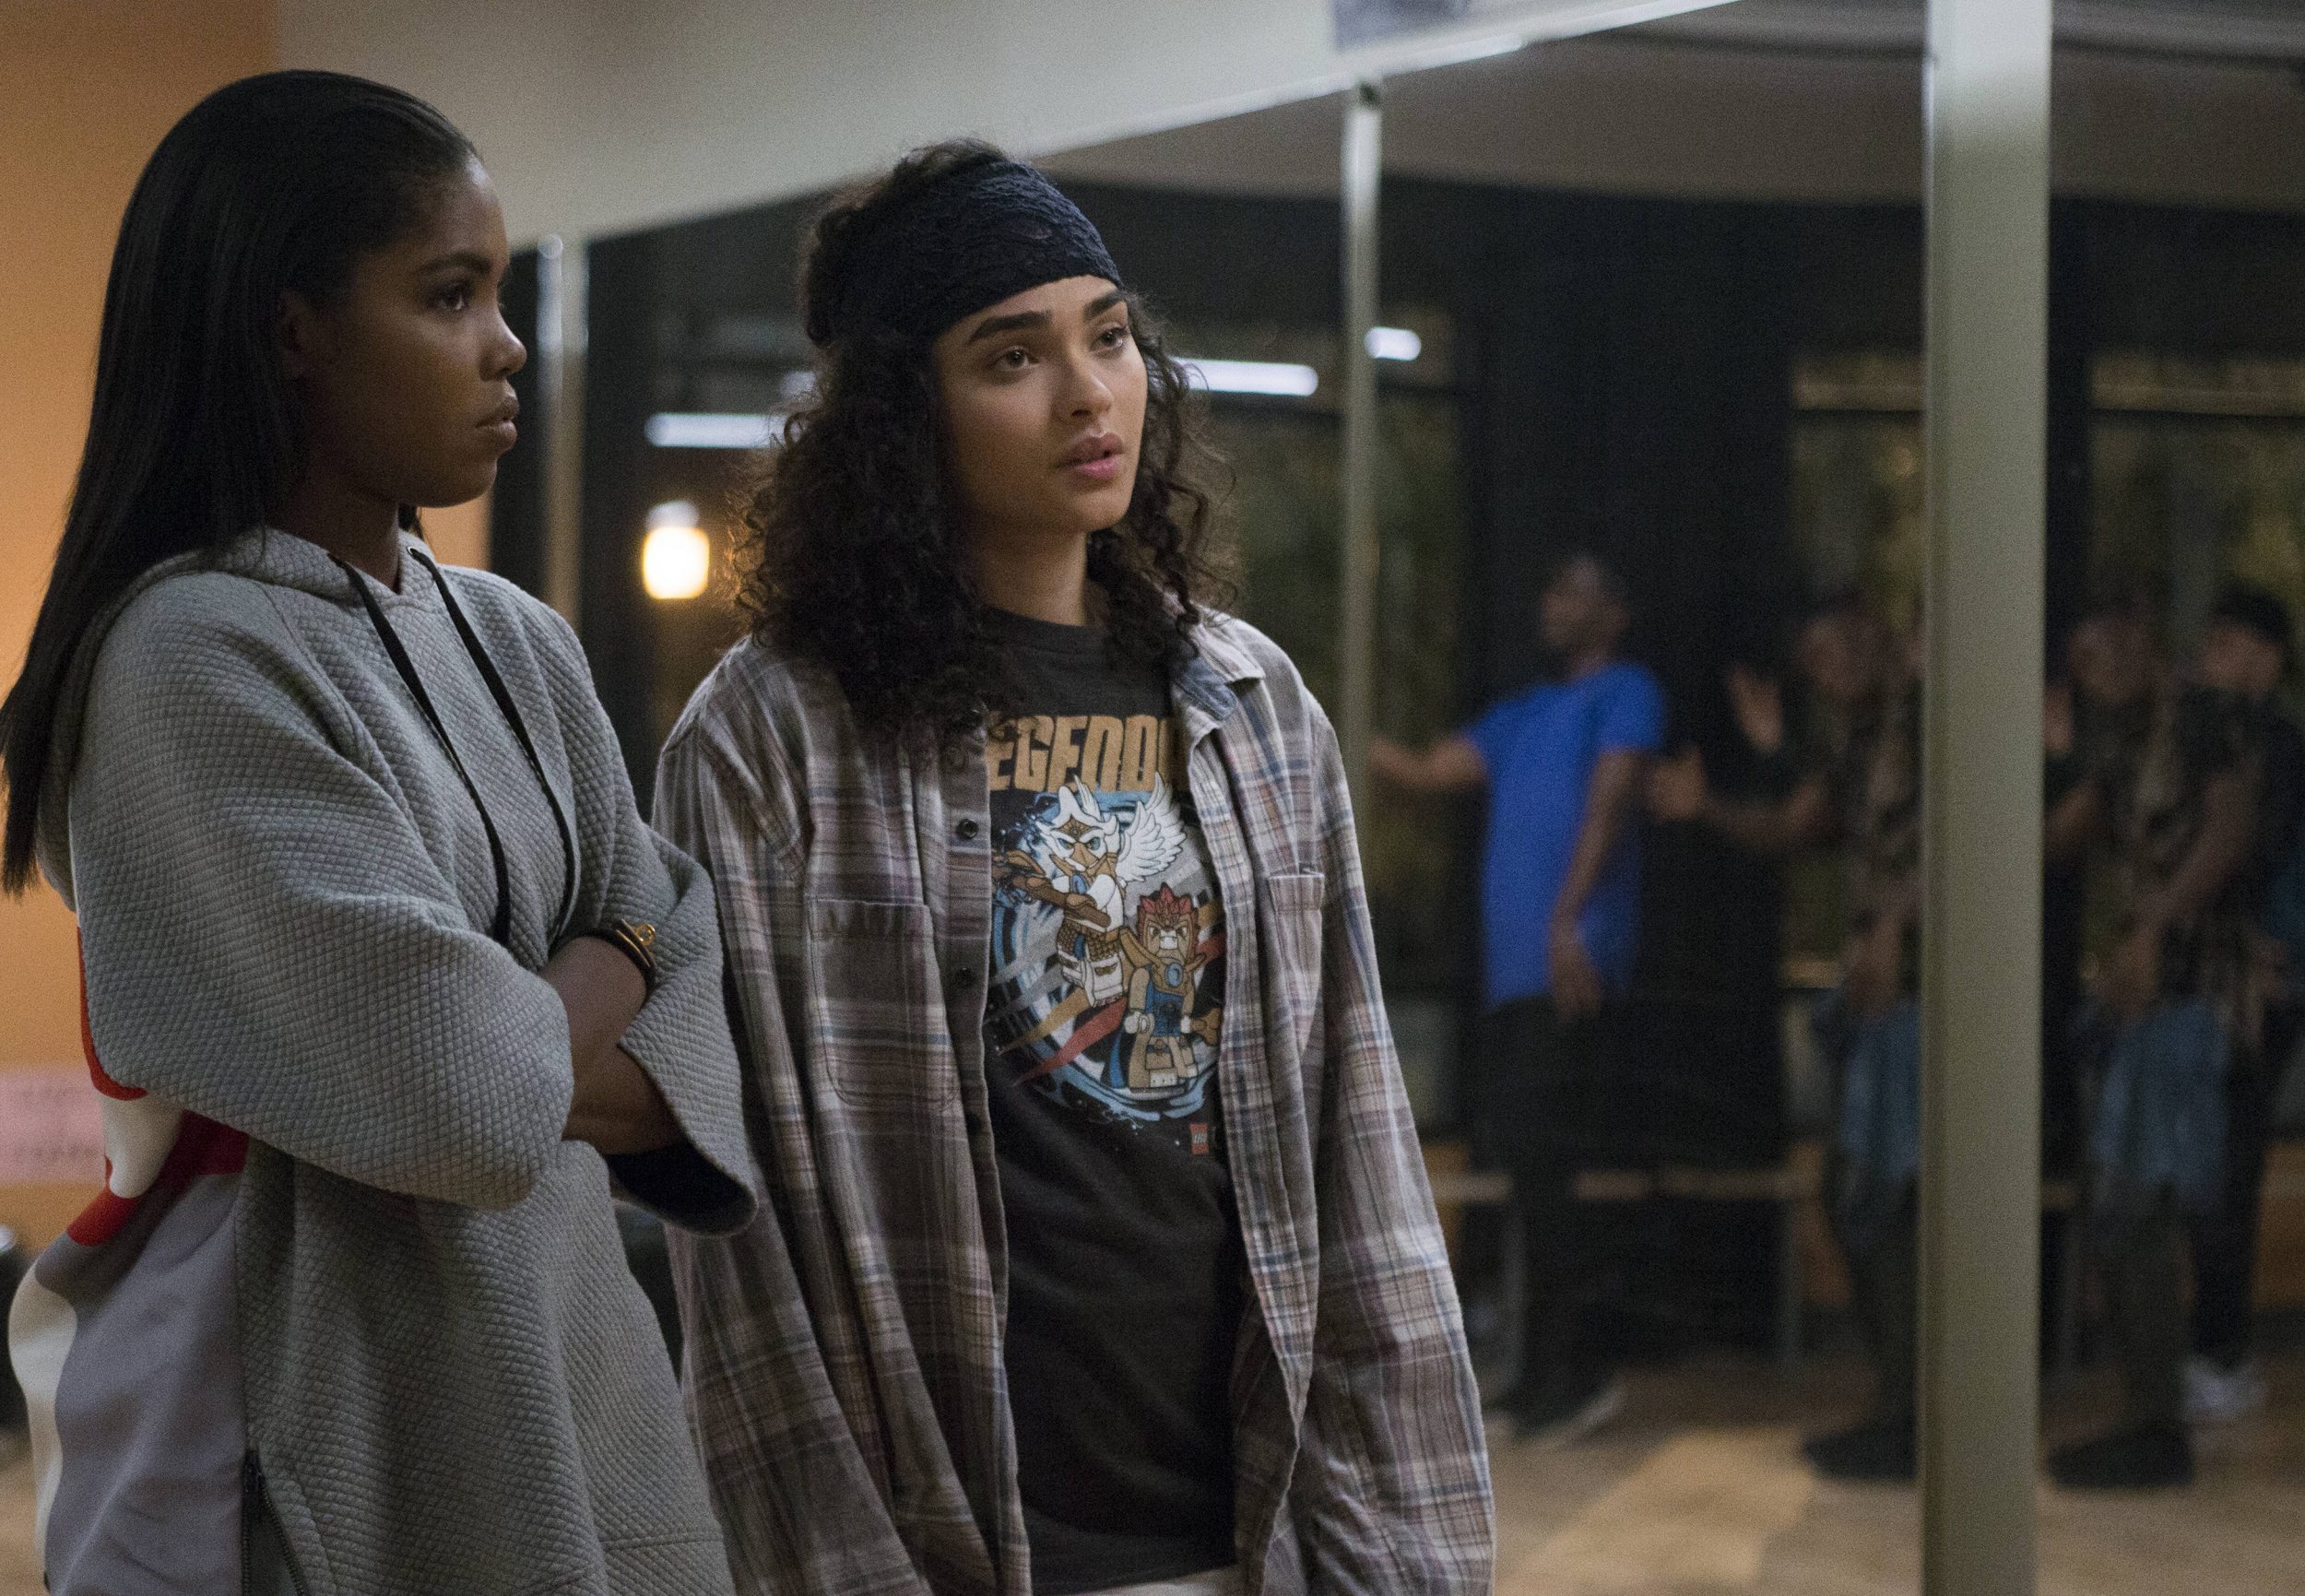 STAR: Pictured L-R: Ryan Destiny and Brittany O'Grady in the "New Voices" episode of STAR airing Wednesday, Jan. 25 (9:01-10:00 PM ET/PT) on FOX. ©2016 Fox Broadcasting Co. CR: Wilford Harewood/FOX